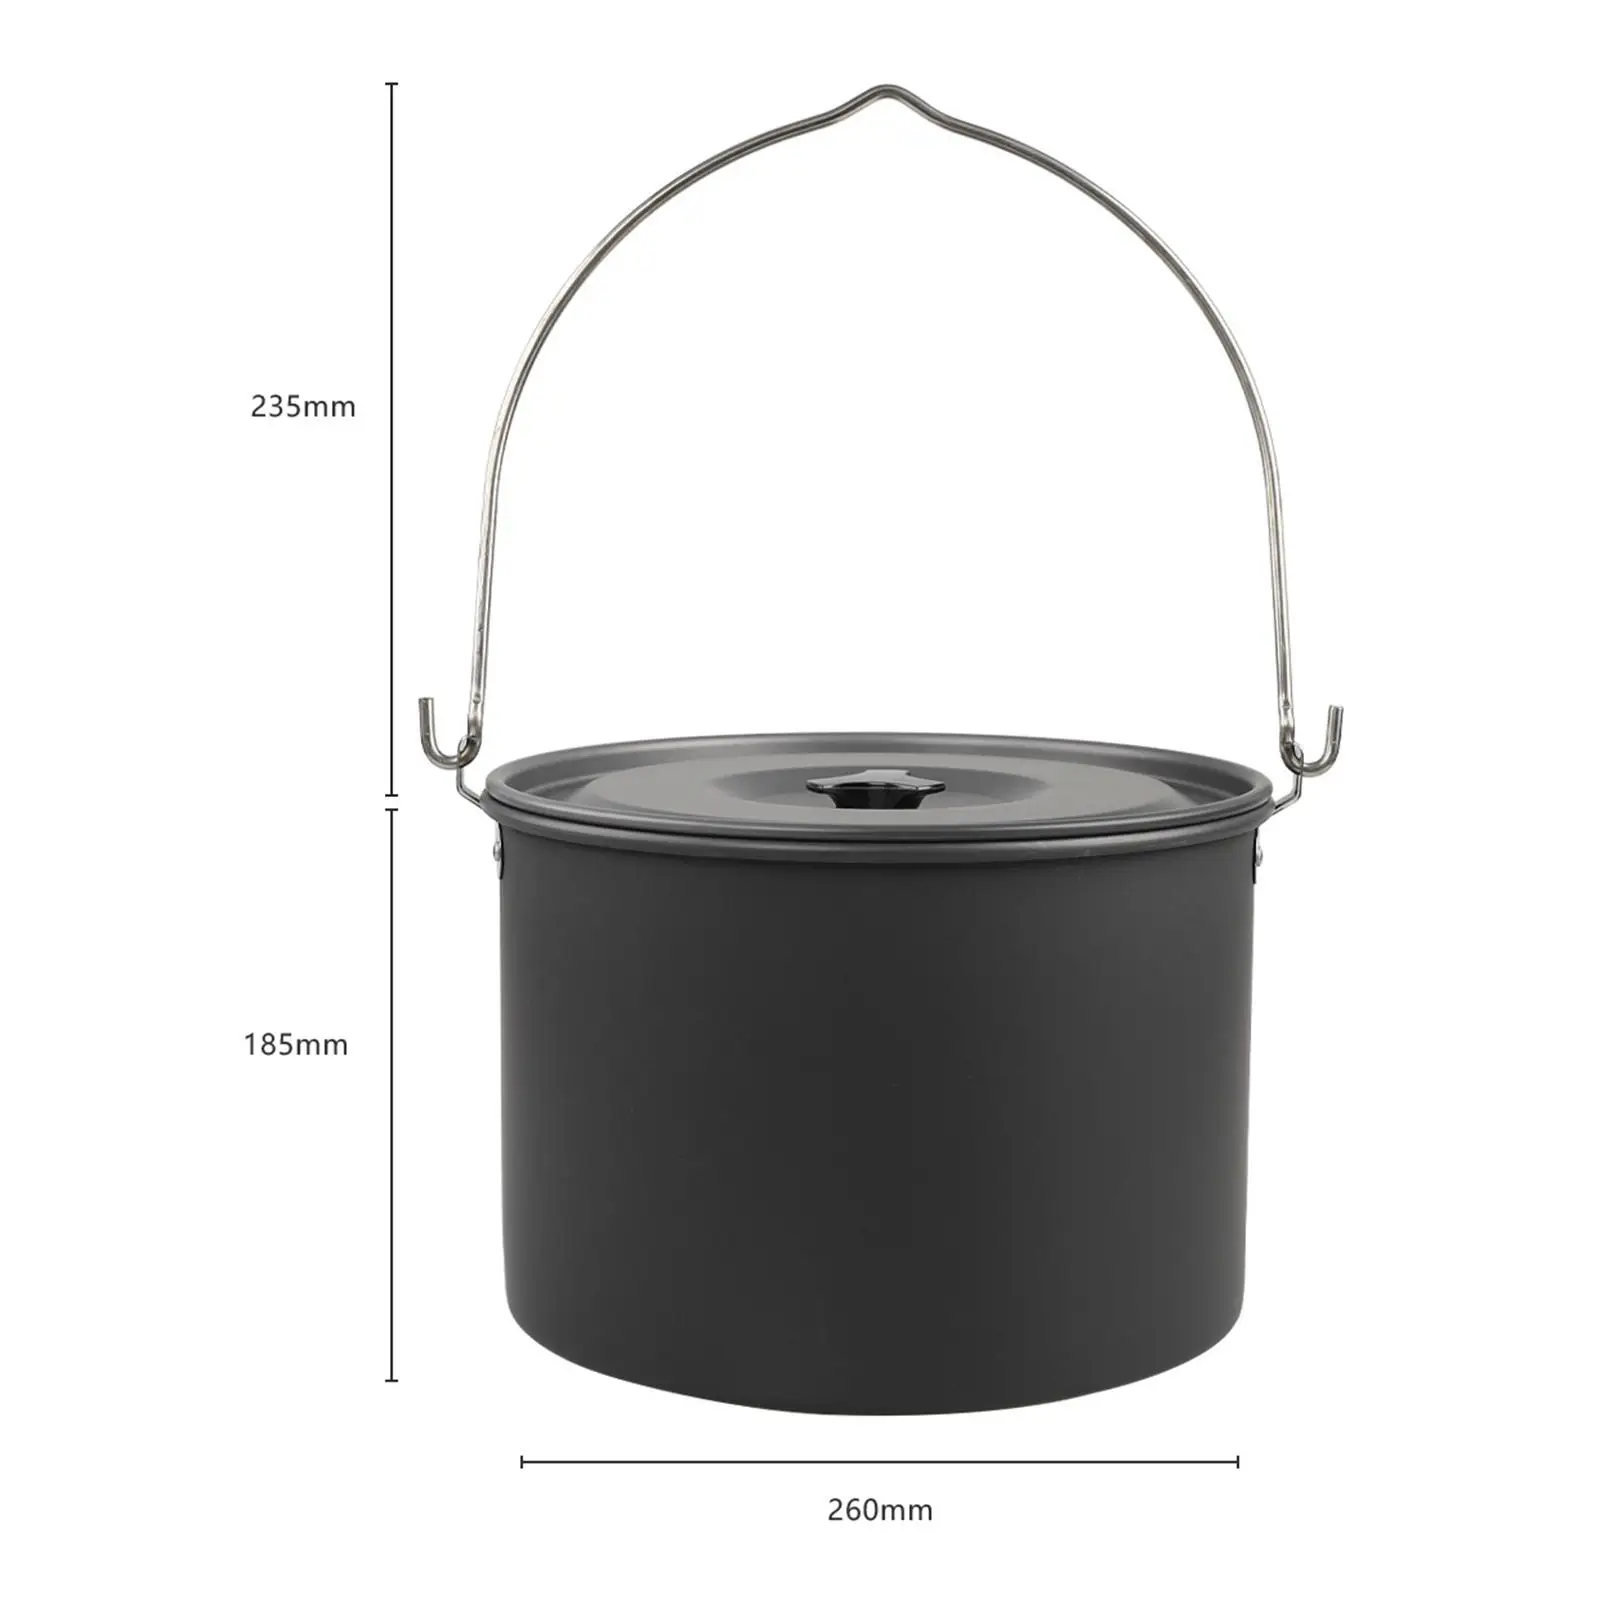 Camping Pot High Capacity Lightweight Household with Lid Cooking Cookware Outdoor Pot Pan for Hiking Travel BBQ Survival Outdoor